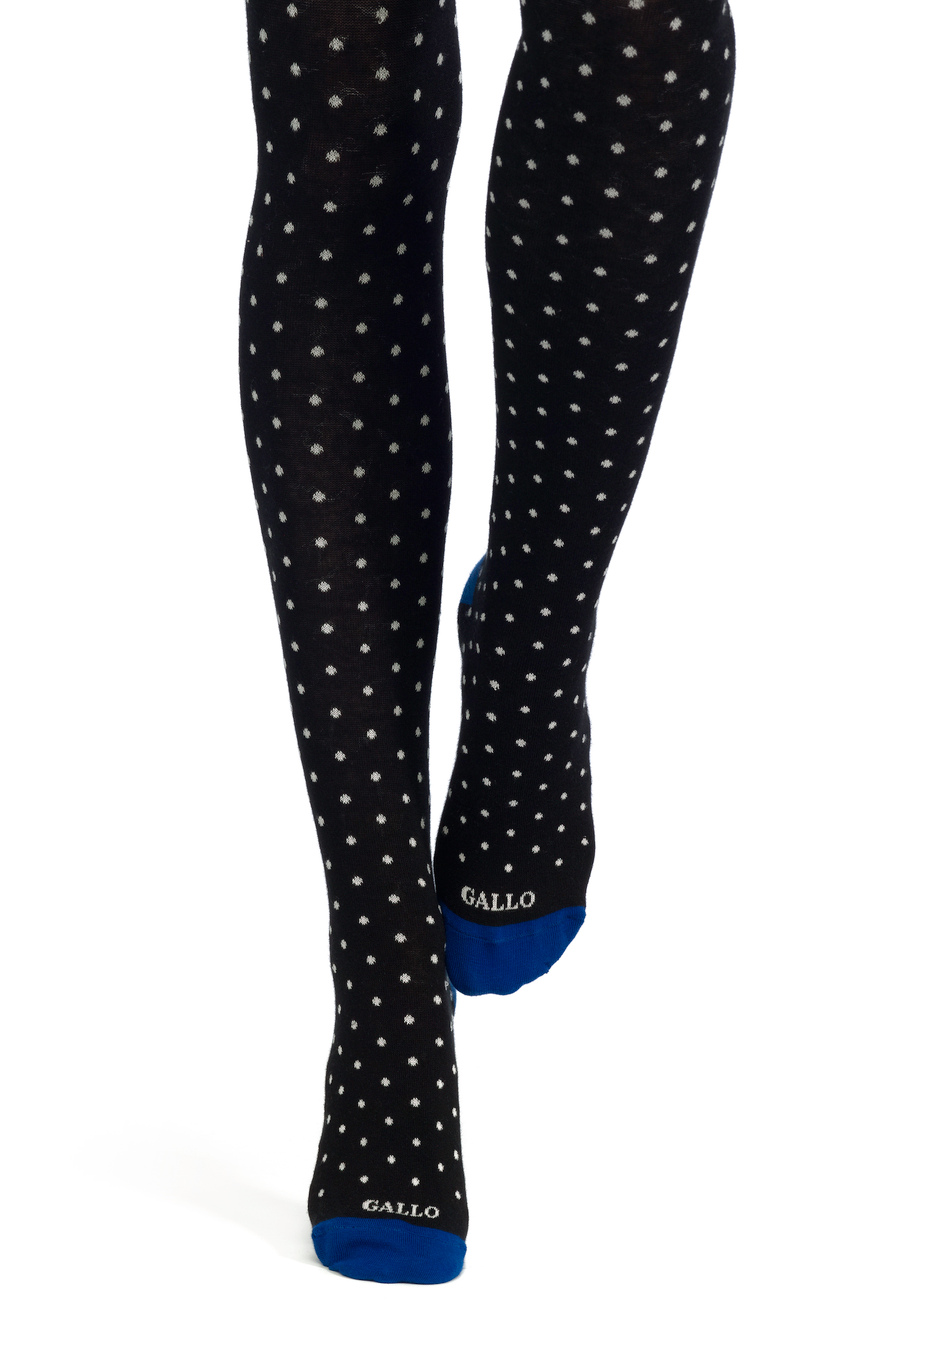 Women's black cotton tights with polka dots pattern